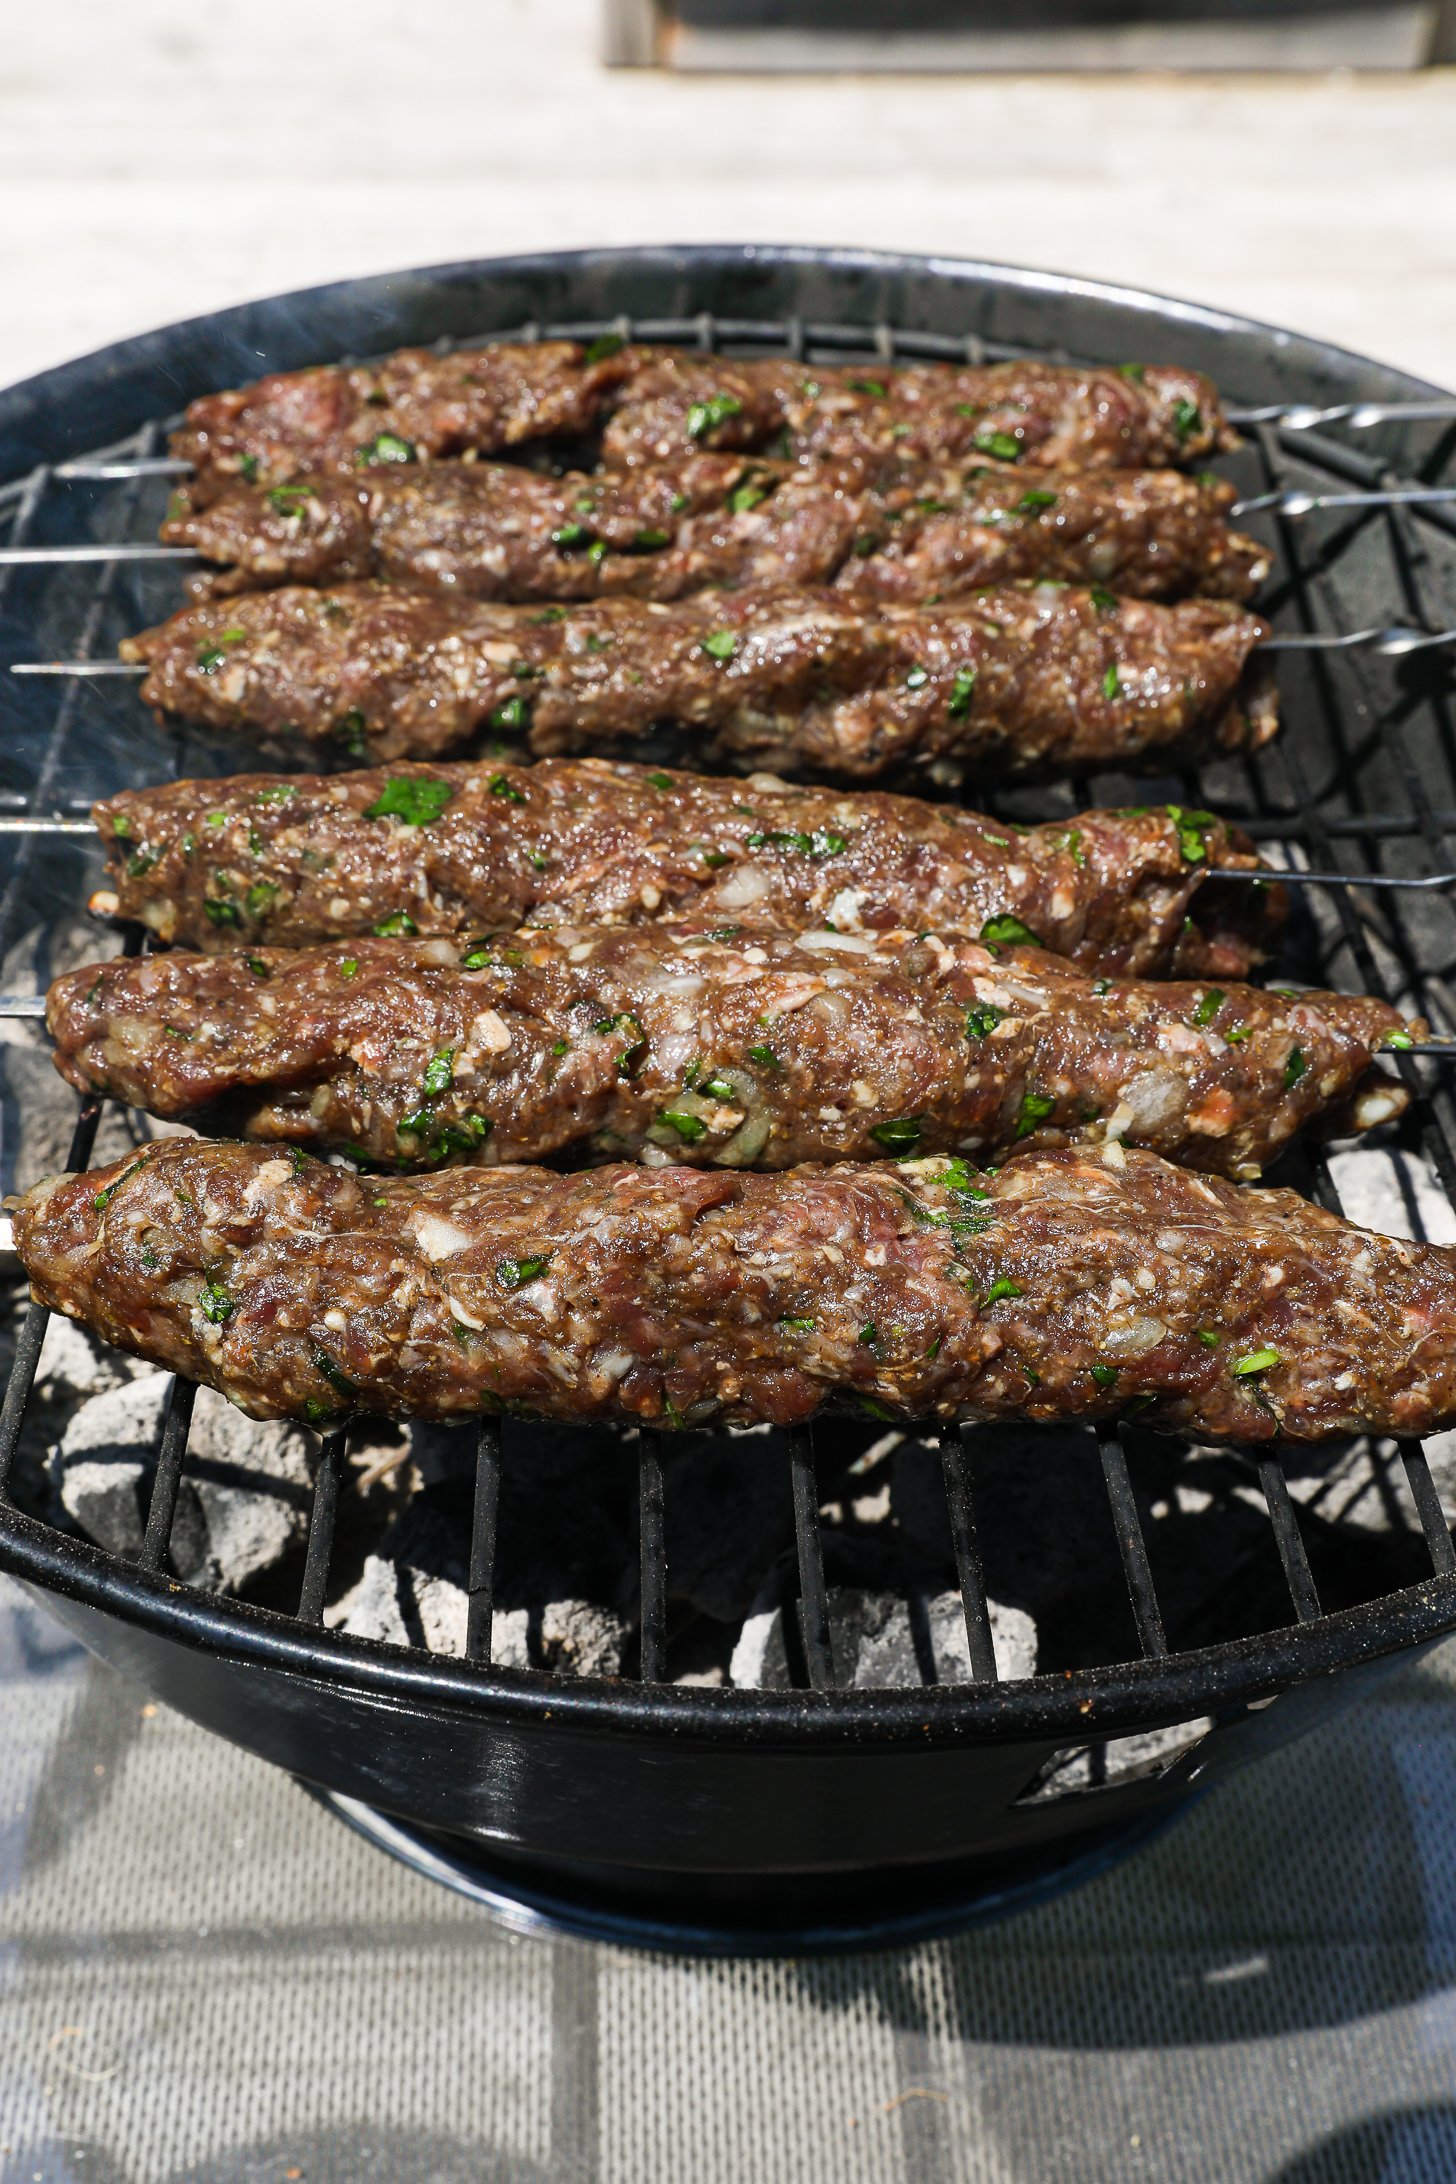 Perspective view of raw mince beef kebabs on skewers on an outdoor charcoal grill.